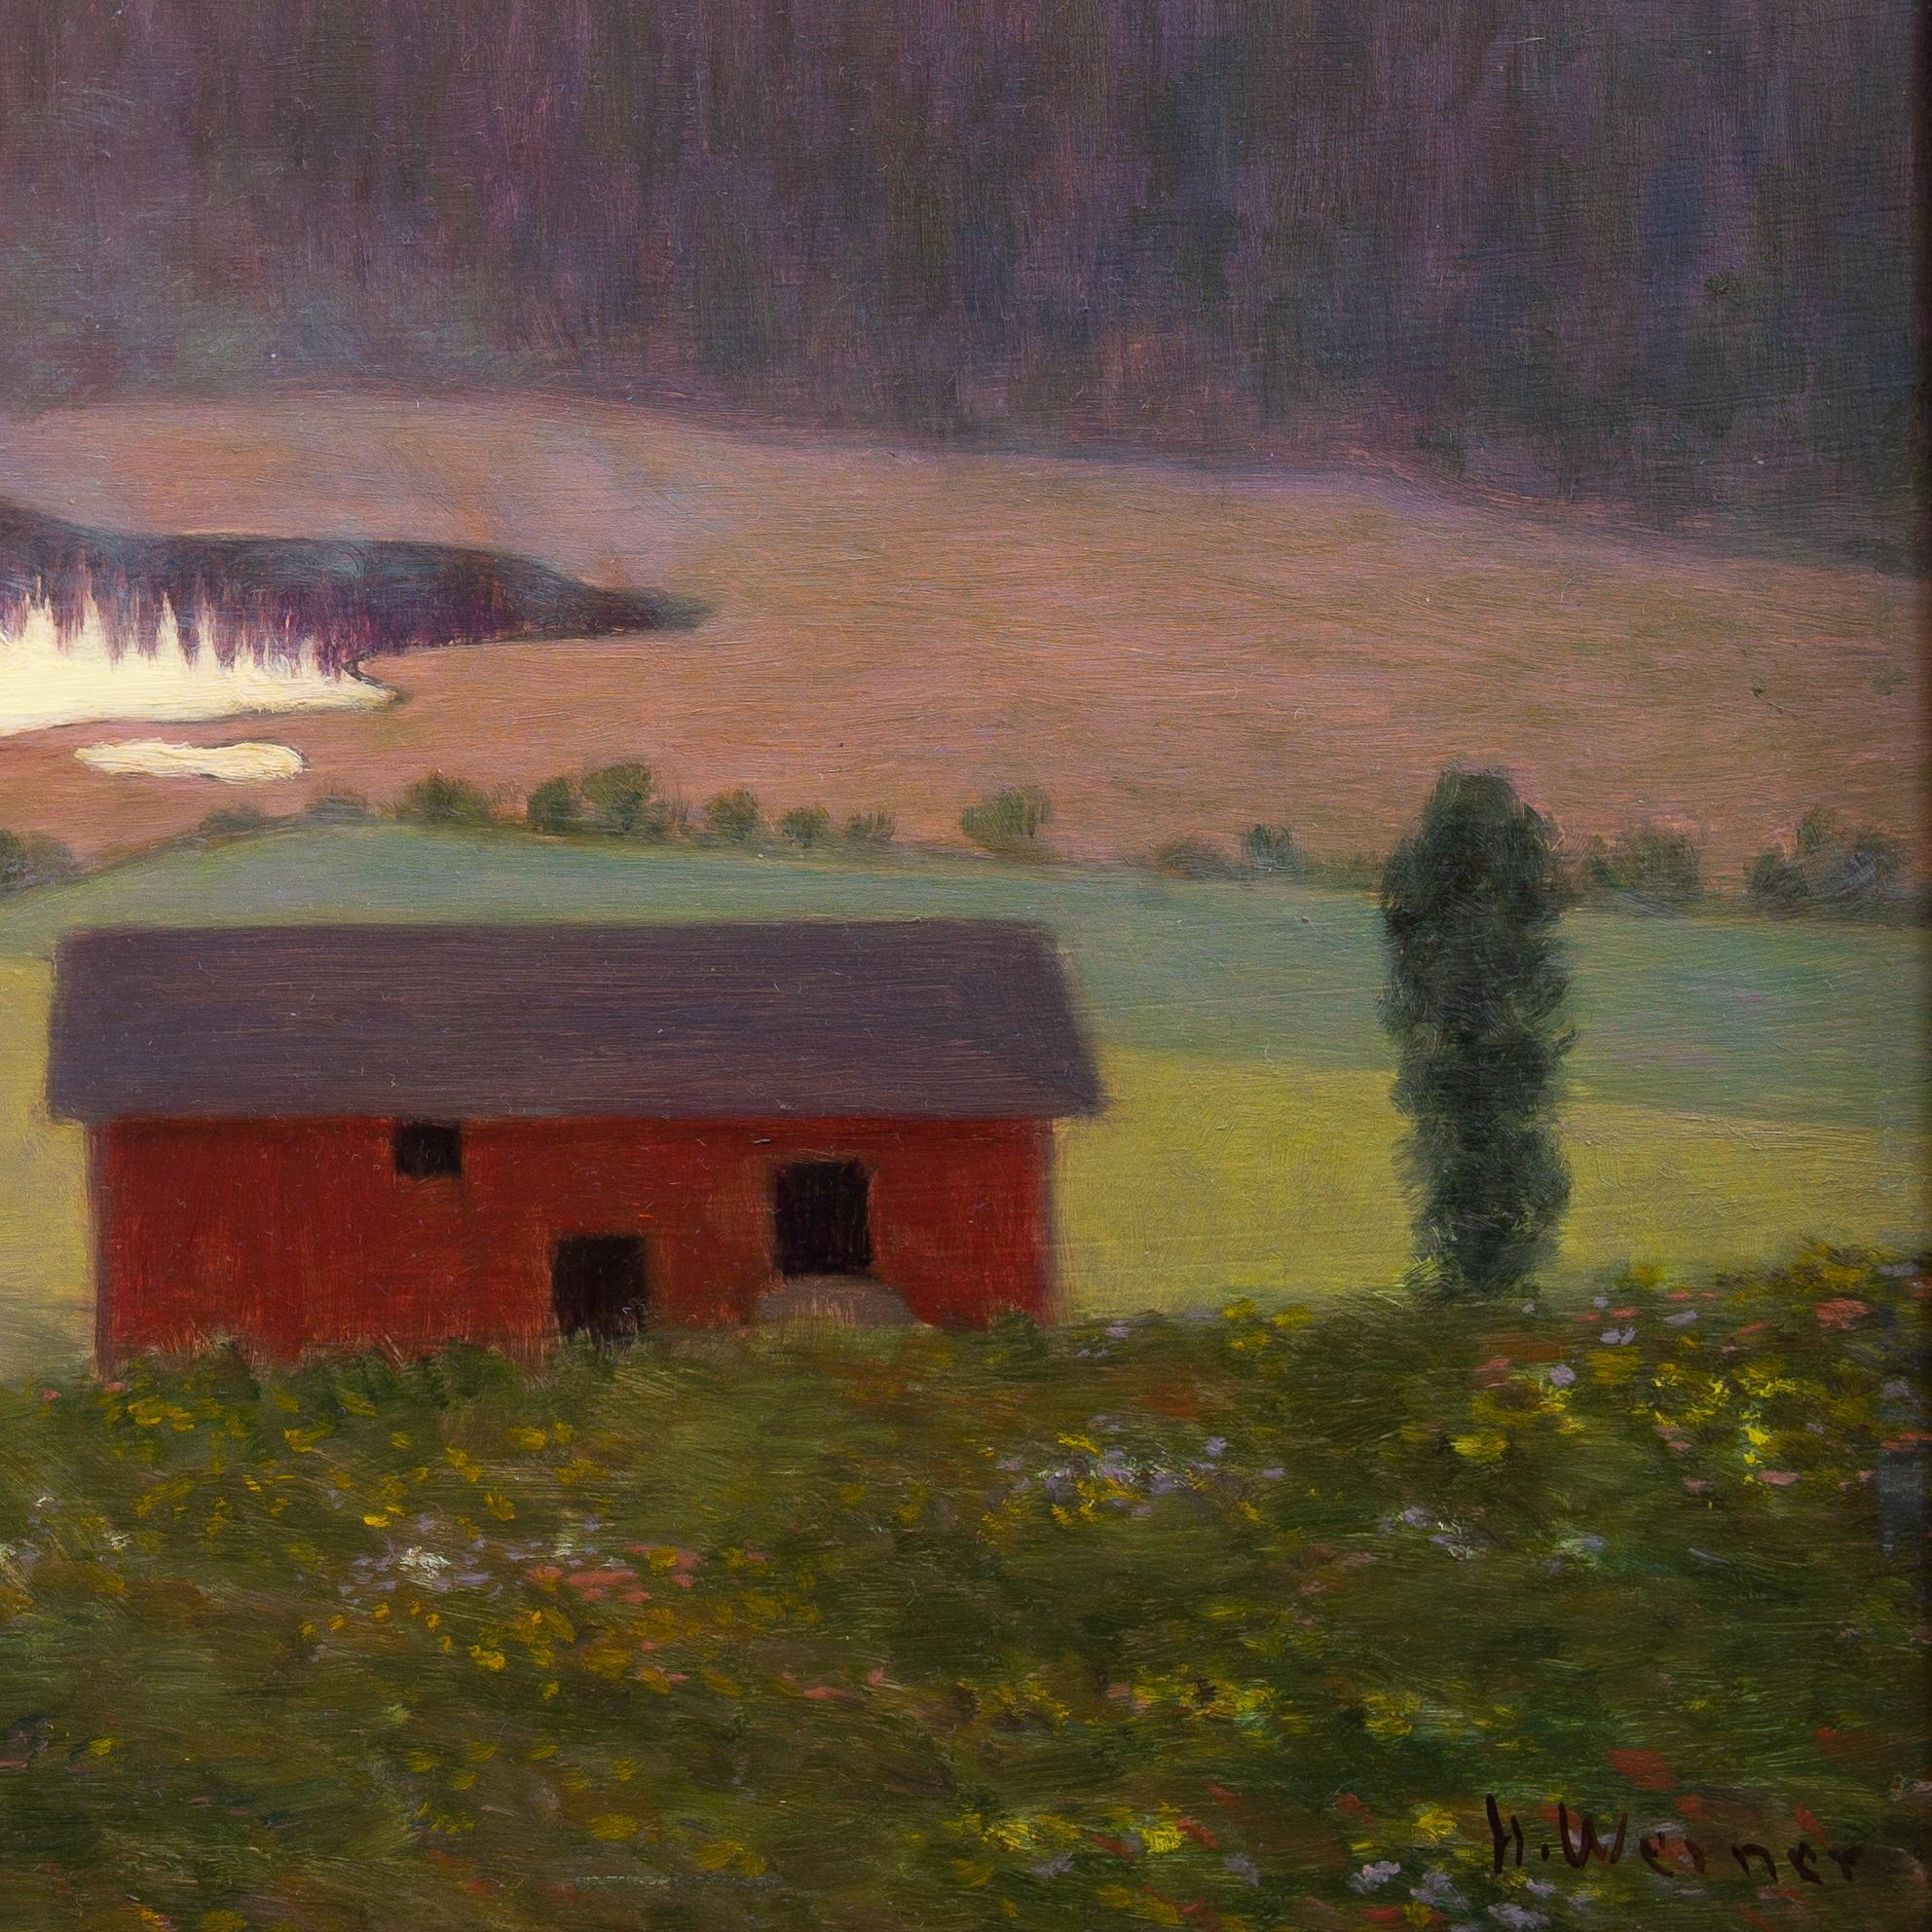 Swedish Värmland Landscape With a Red Barn by Hilding Werner, Oil Painting 1